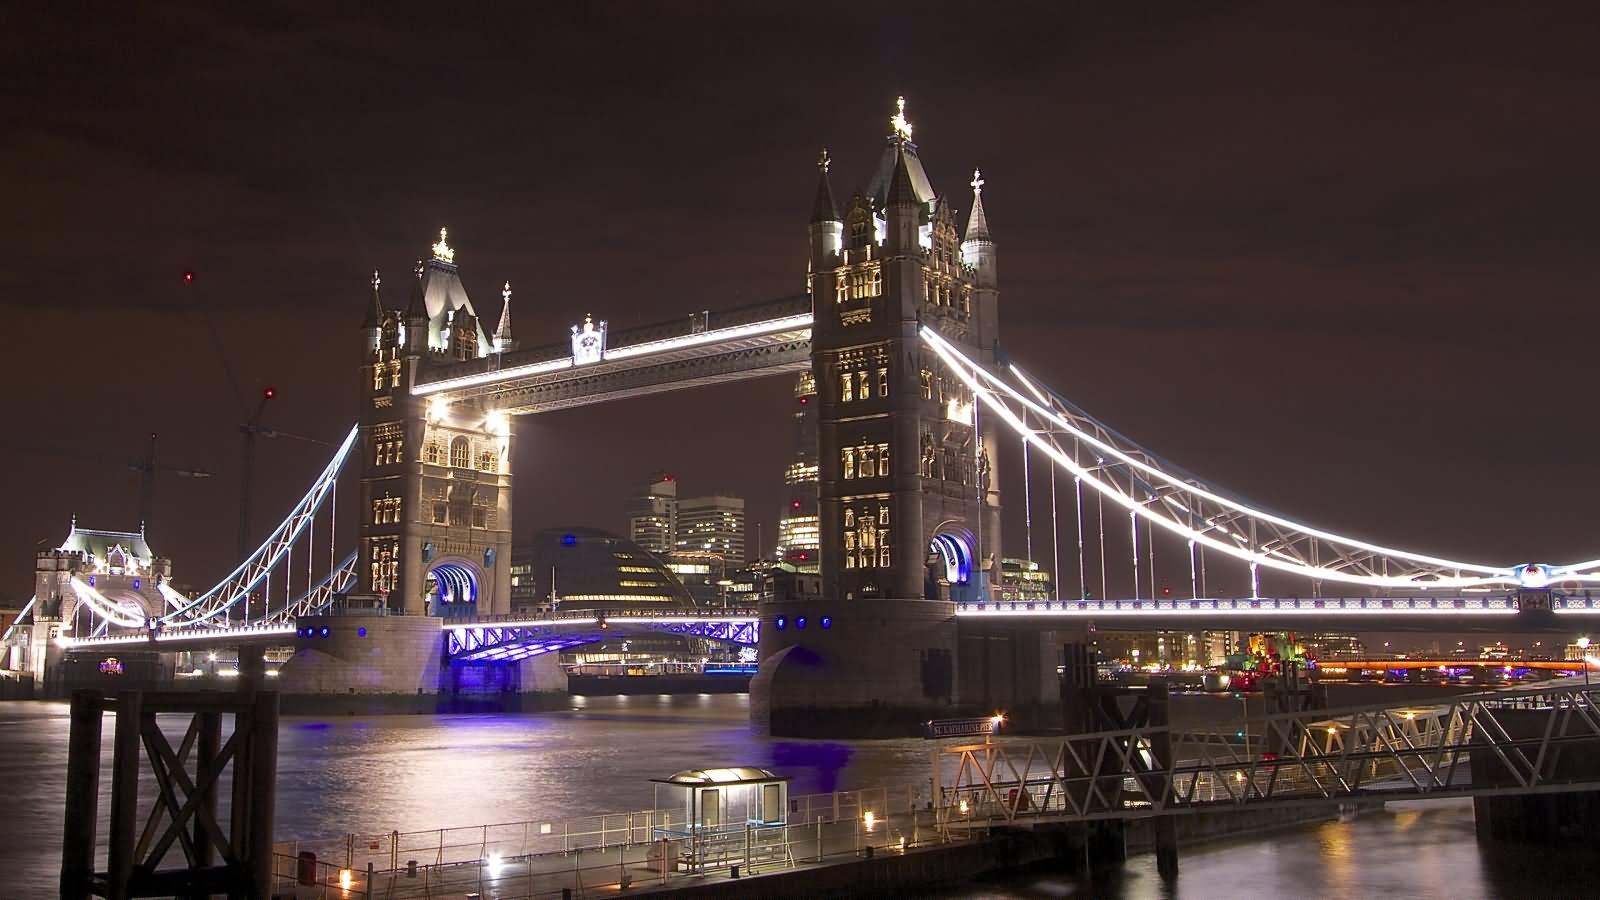 Most Incredible Night View Picture Of Tower Bridge, London